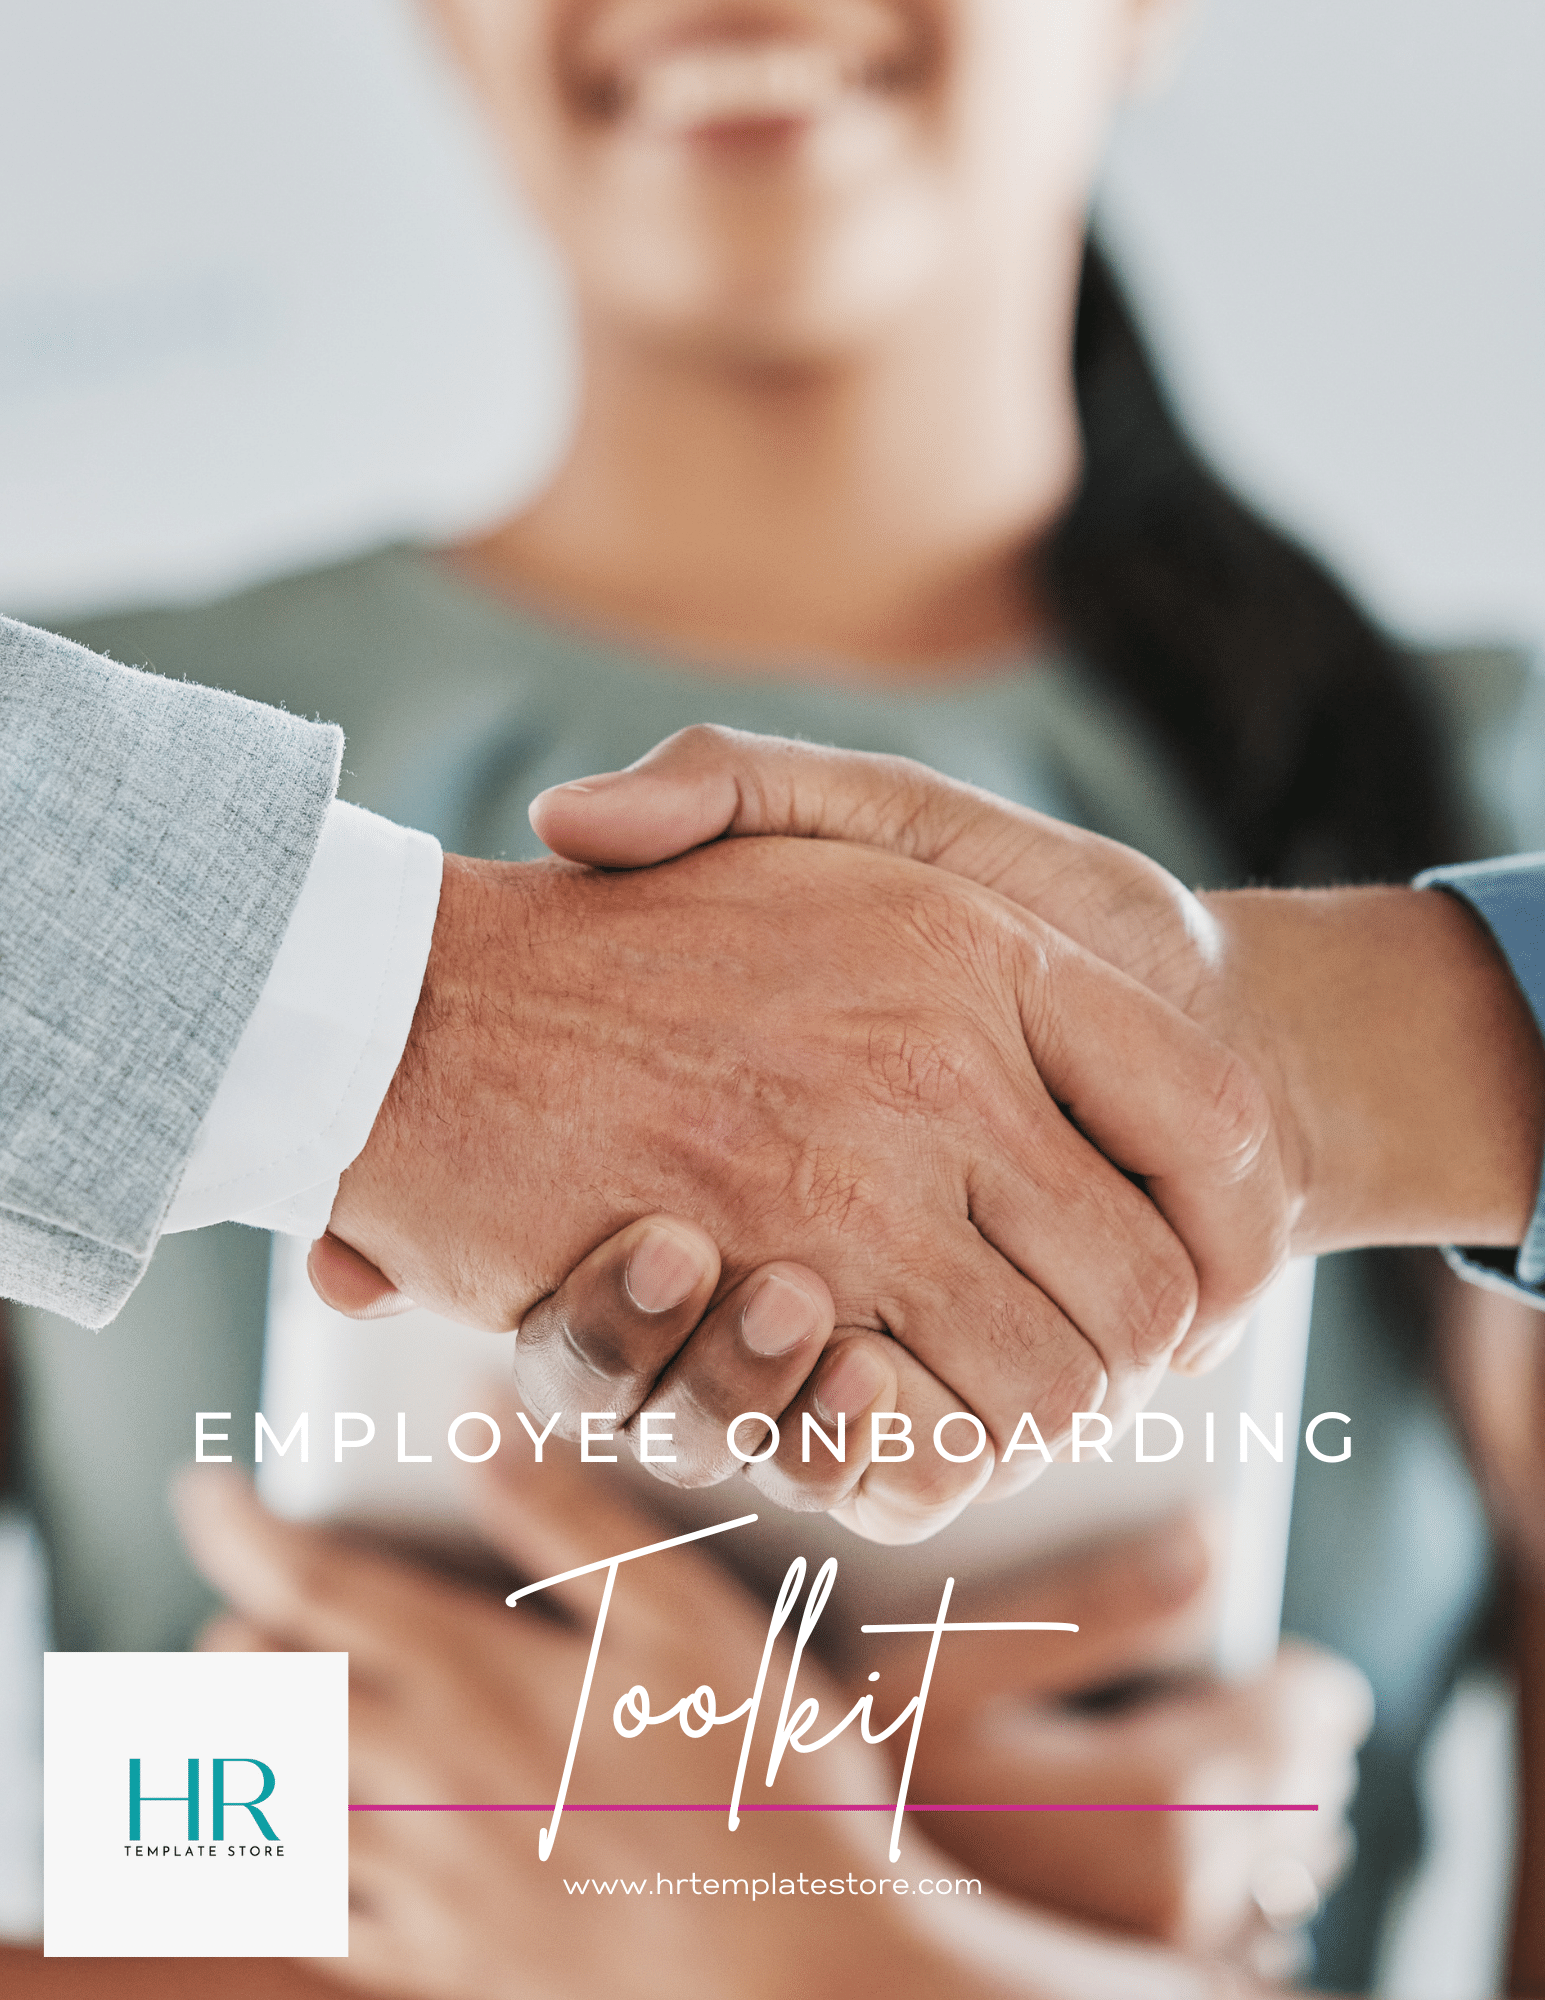 This complete bundle is designed to streamline your hiring process and set your new employee up for success. You'll have everything you need to create an effective onboarding process introducing them to your company culture, policies, and procedures. A smiling woman in the background of 2 people shaking hands. 